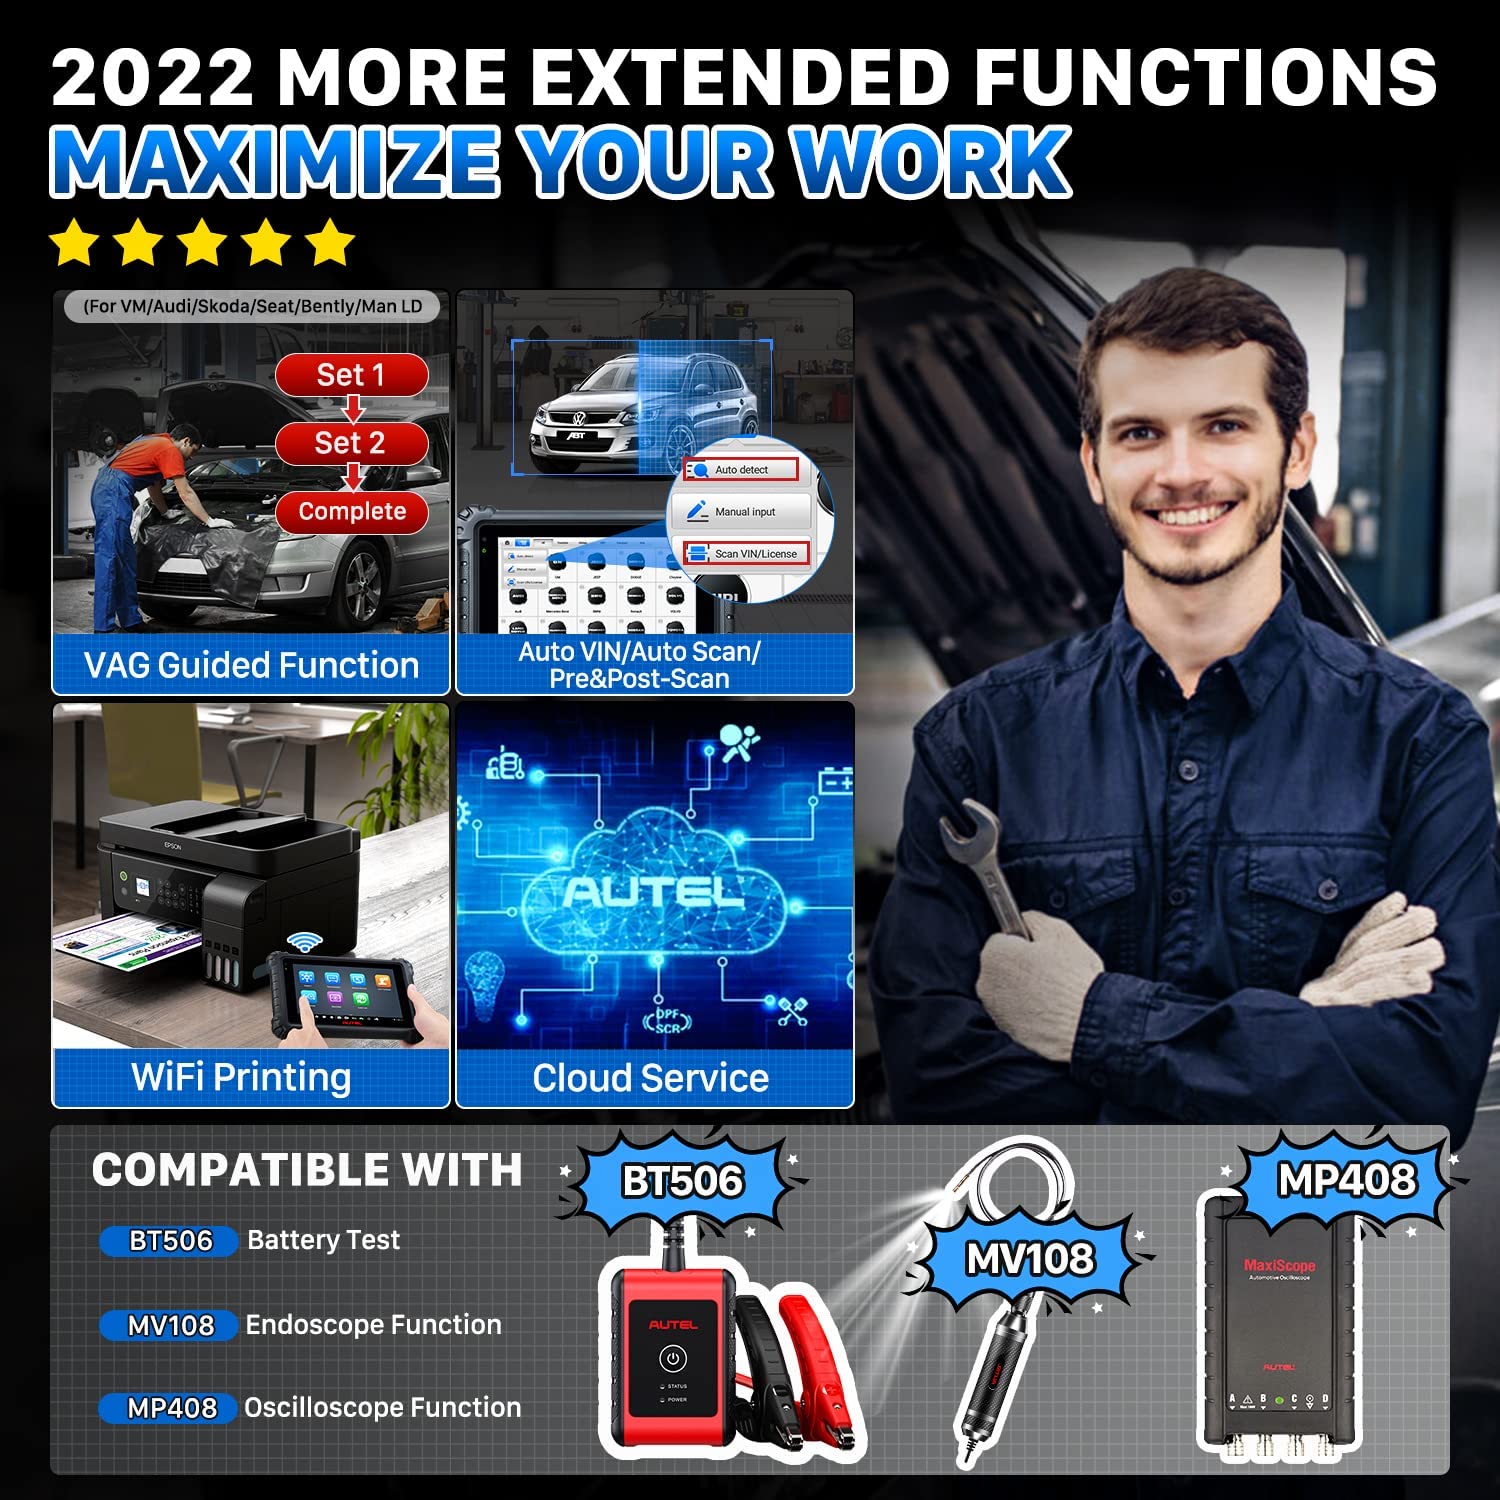 Autel MK906 Pro has more extended functions